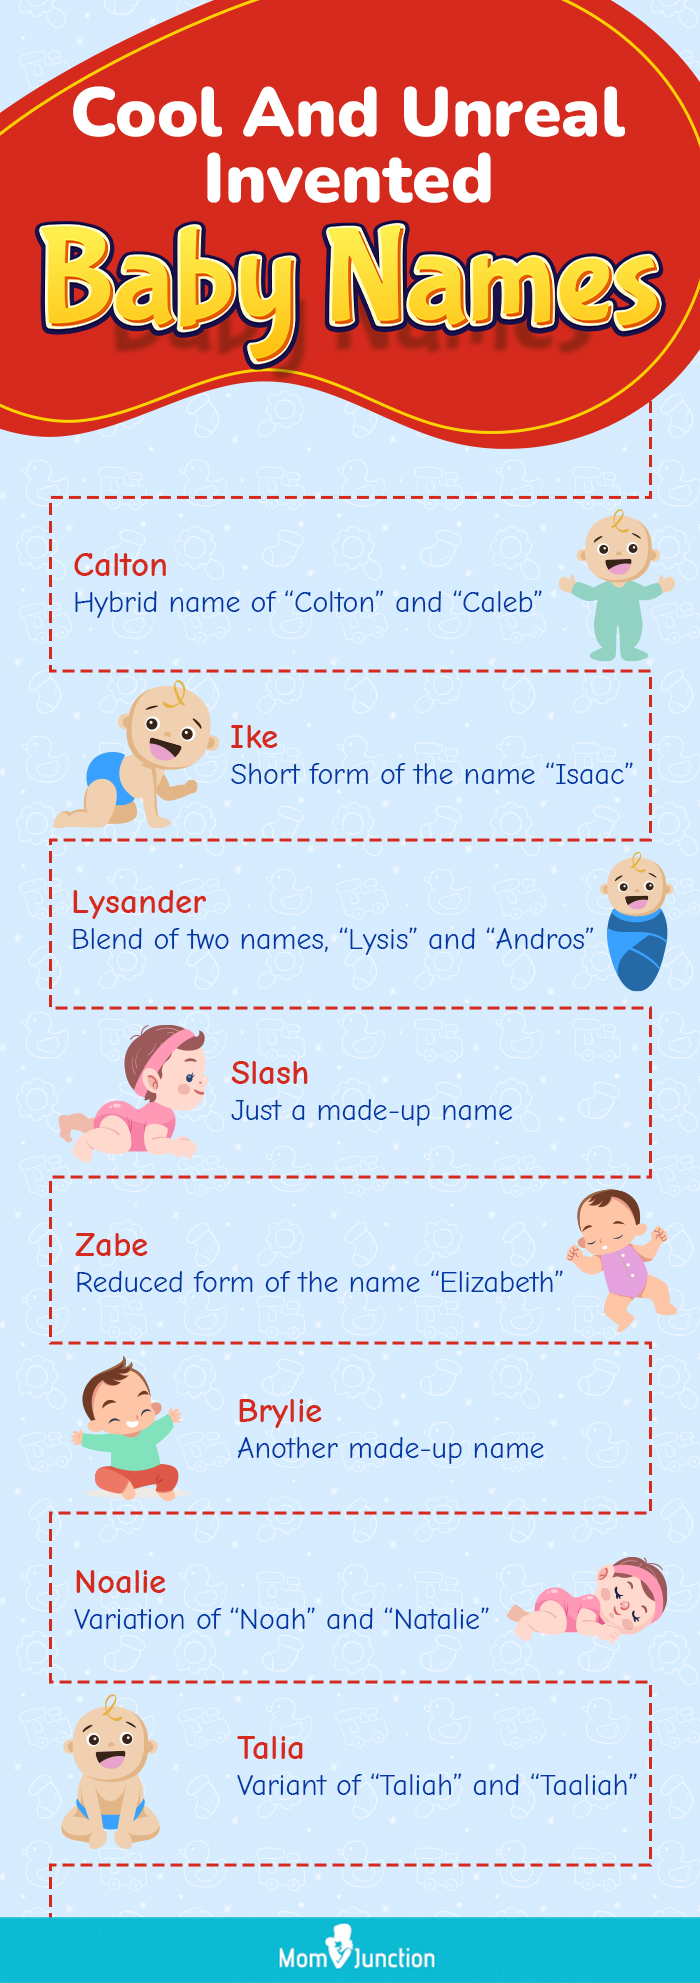 cool and unreal invented baby names [infographic]